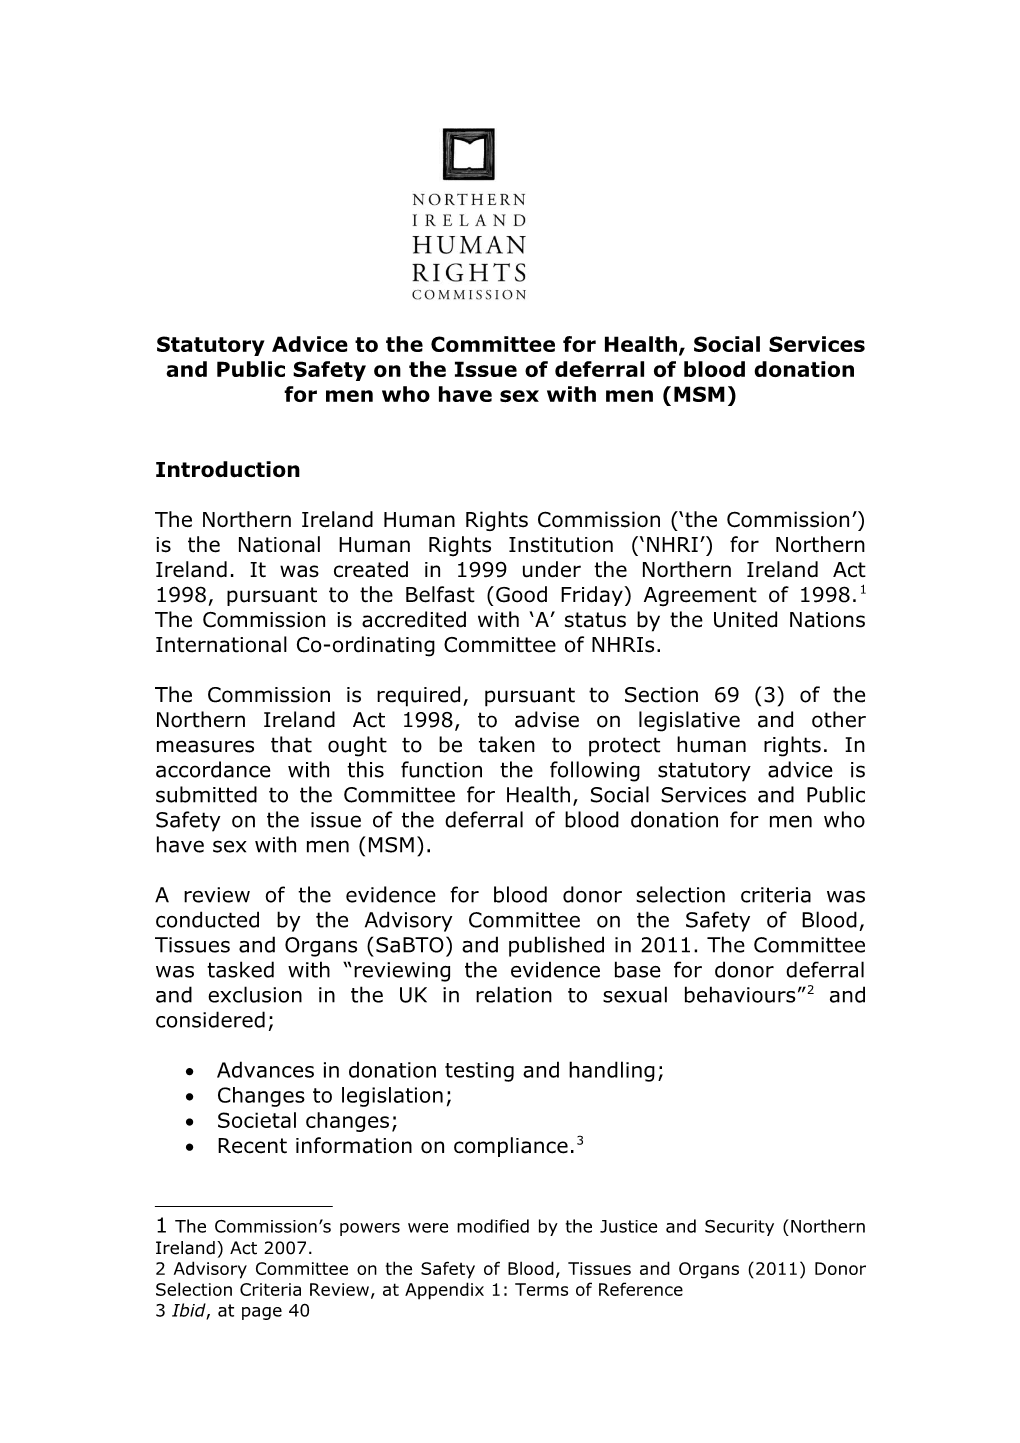 Statutory Advice to the Committee for Health, Social Services and Public Safety on The